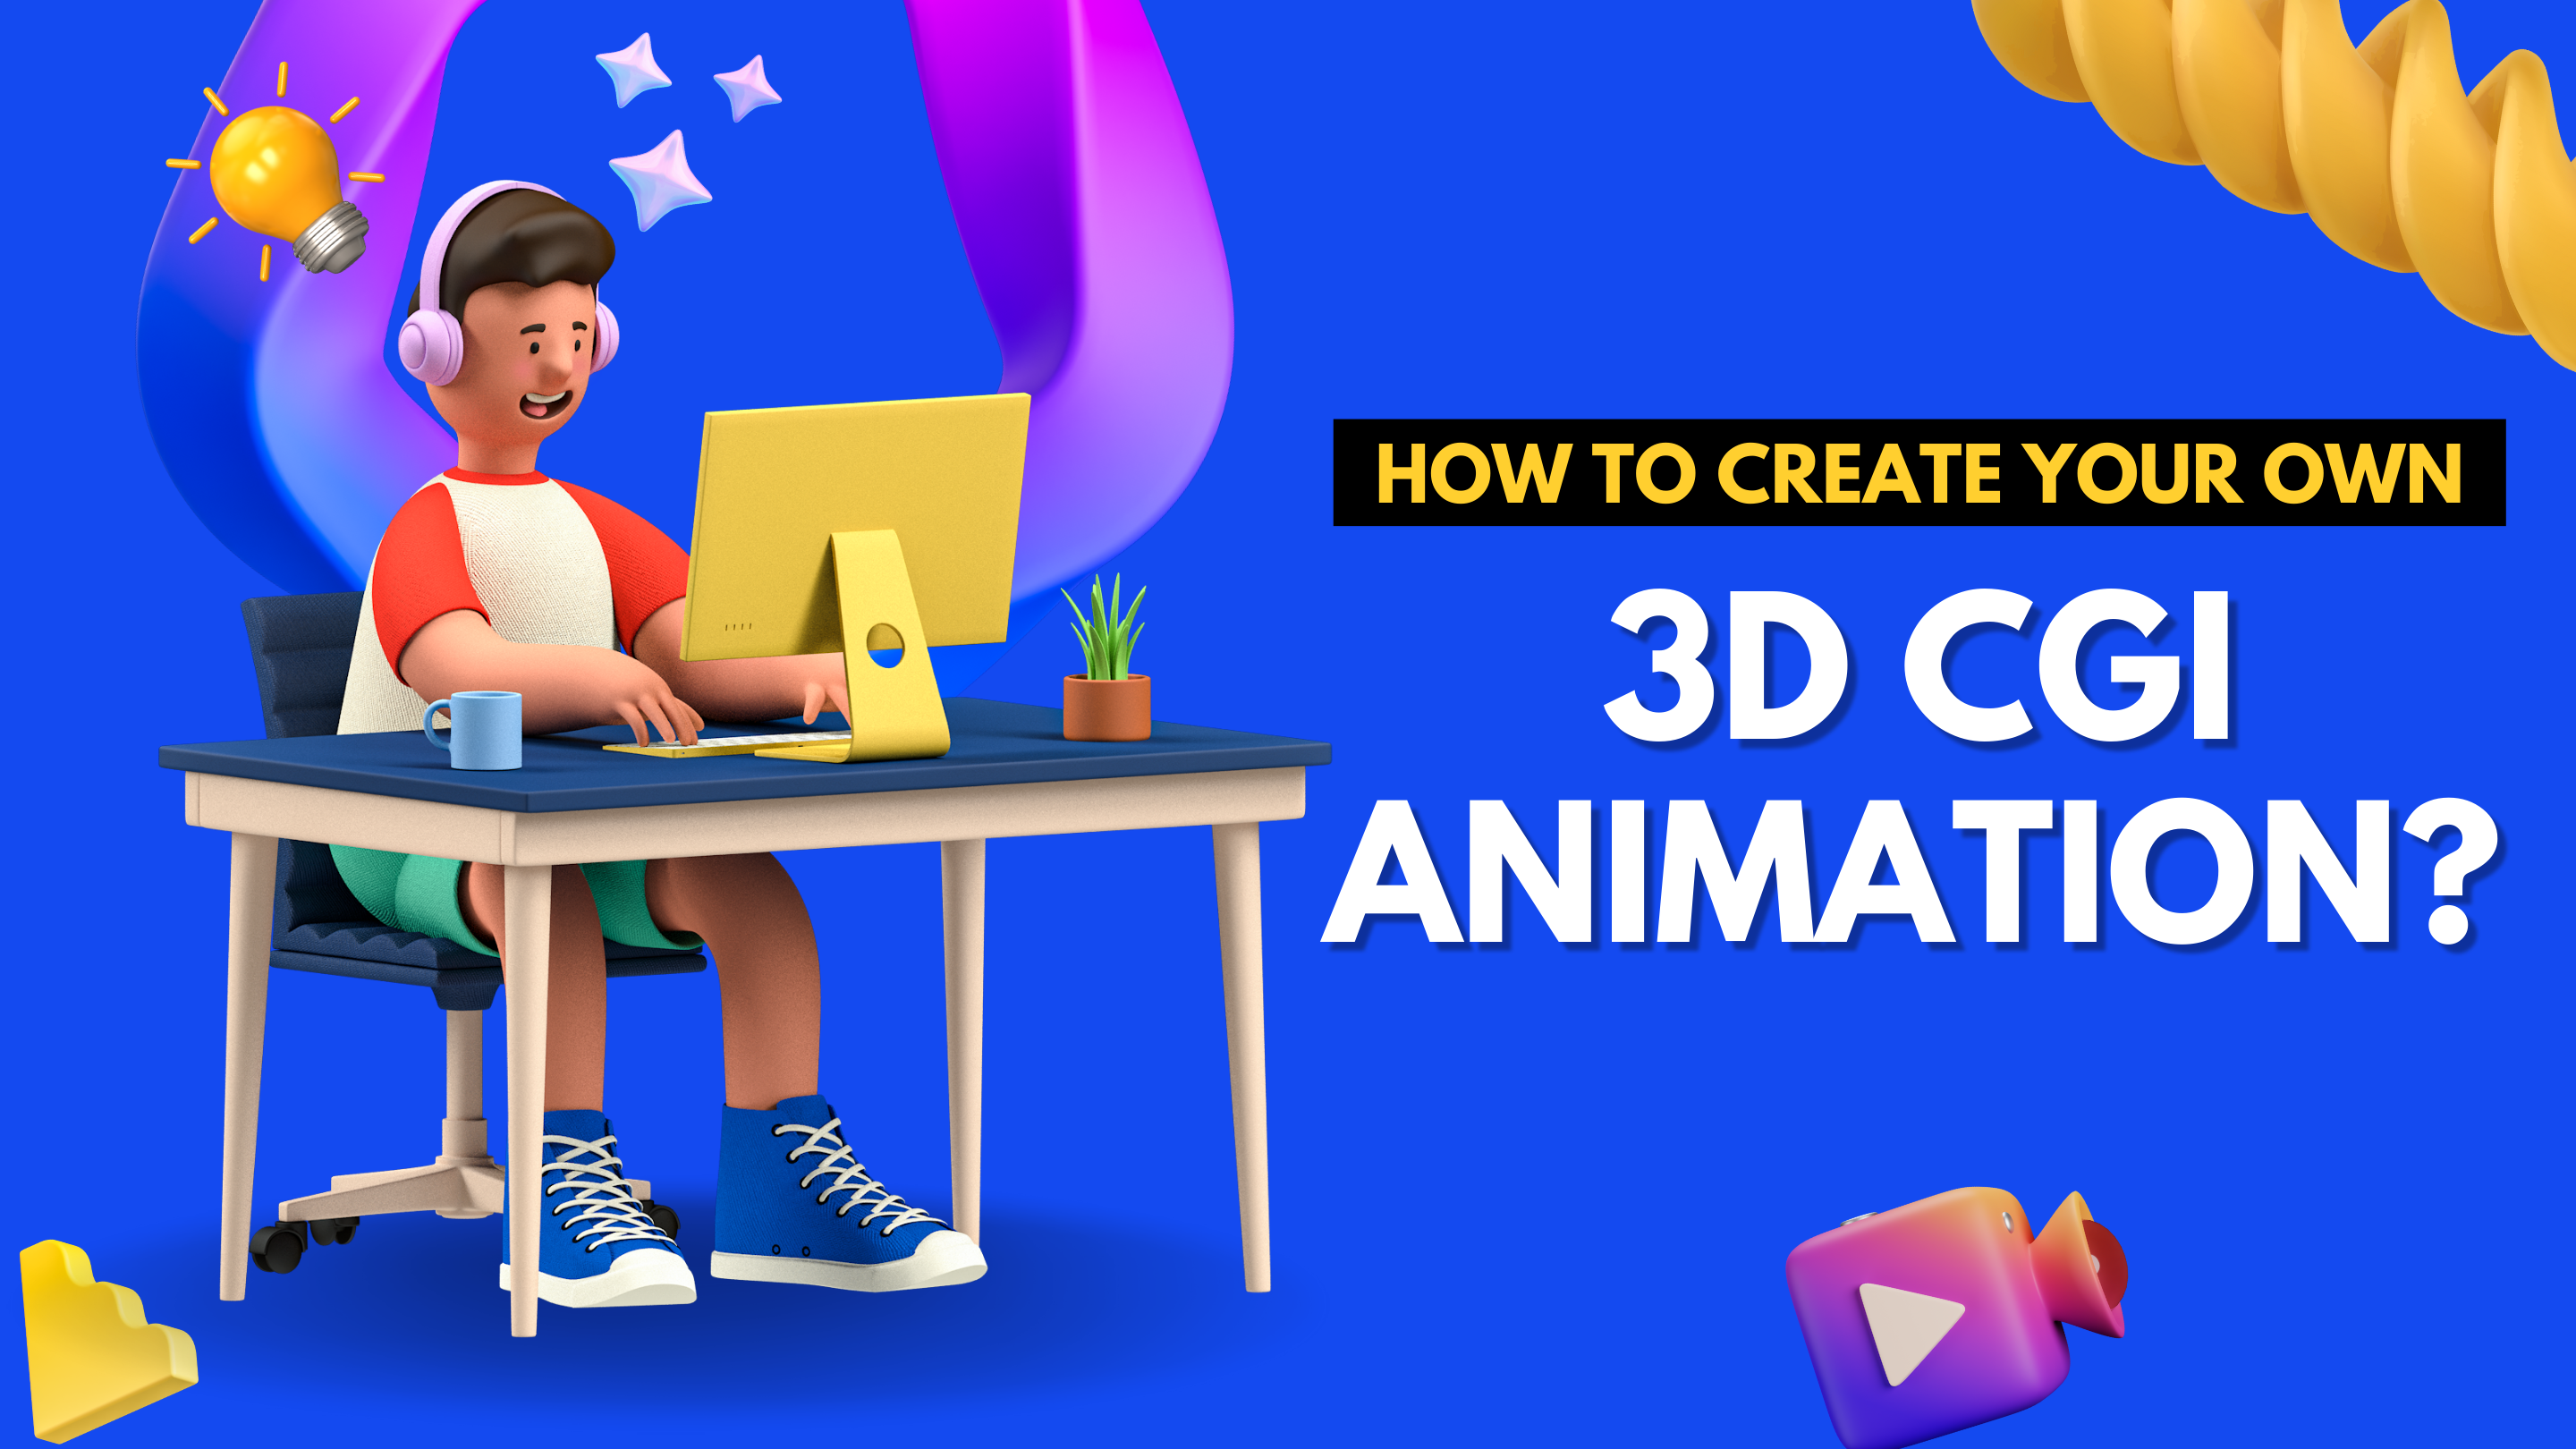 How to create your own 3d CGI animation